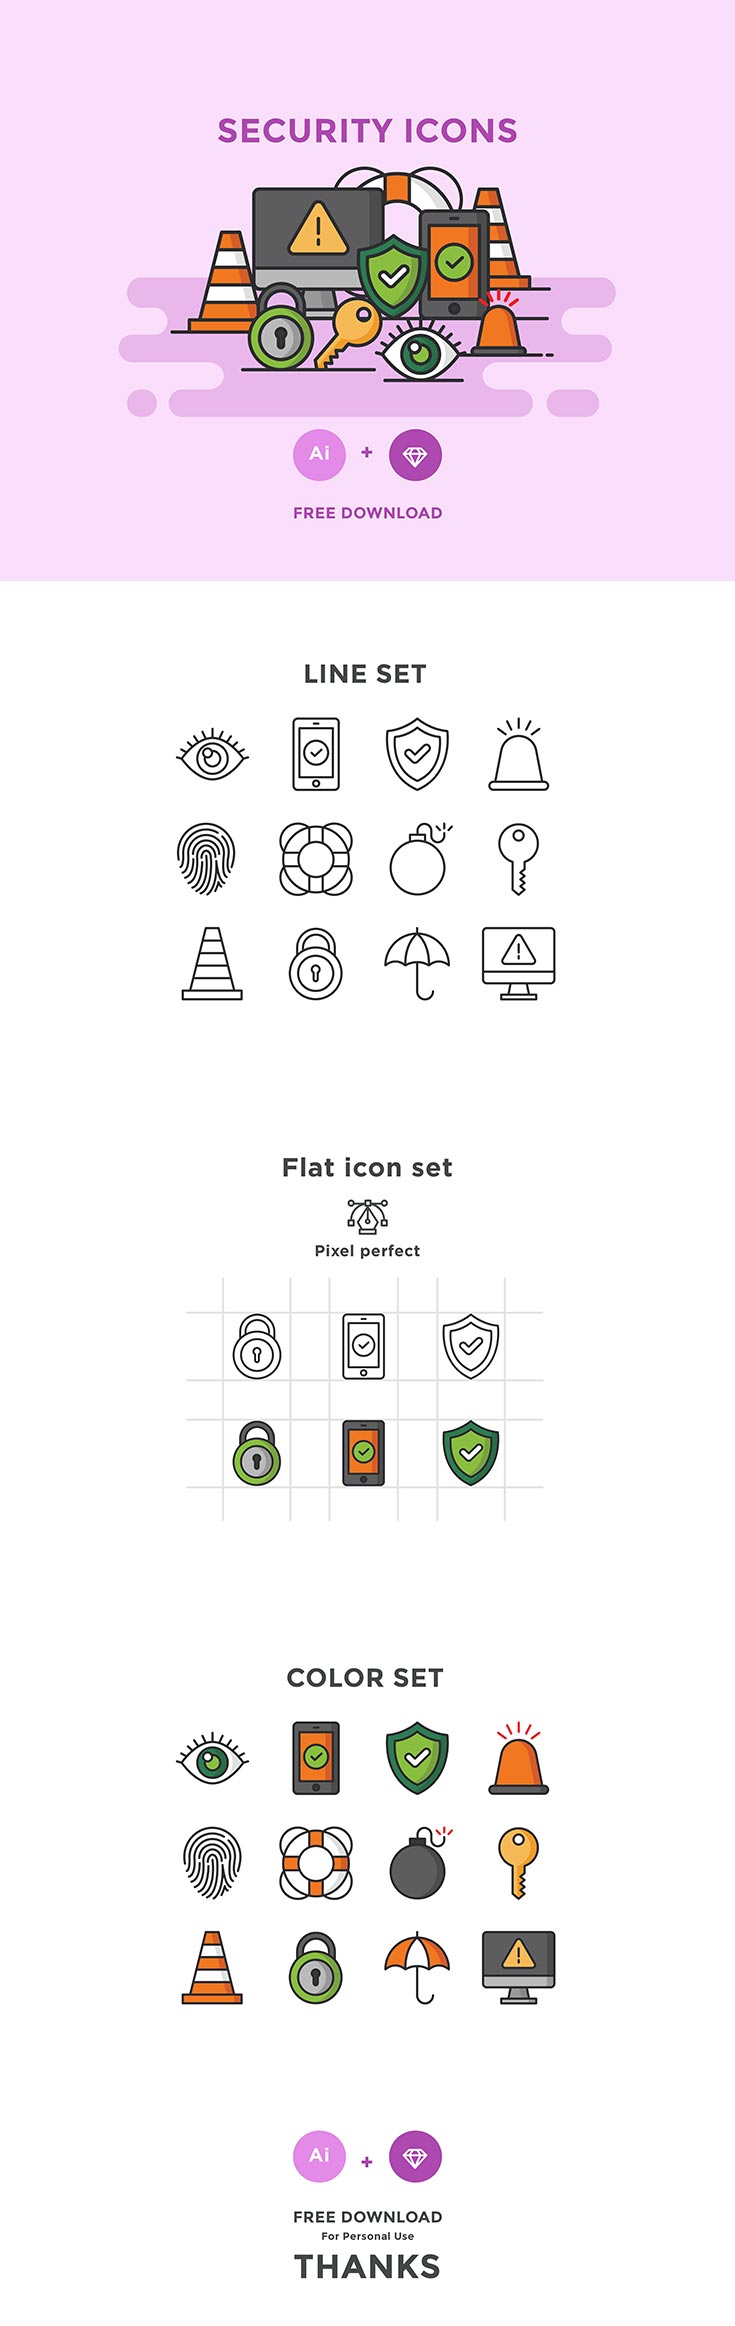 Free Security Vector Icons